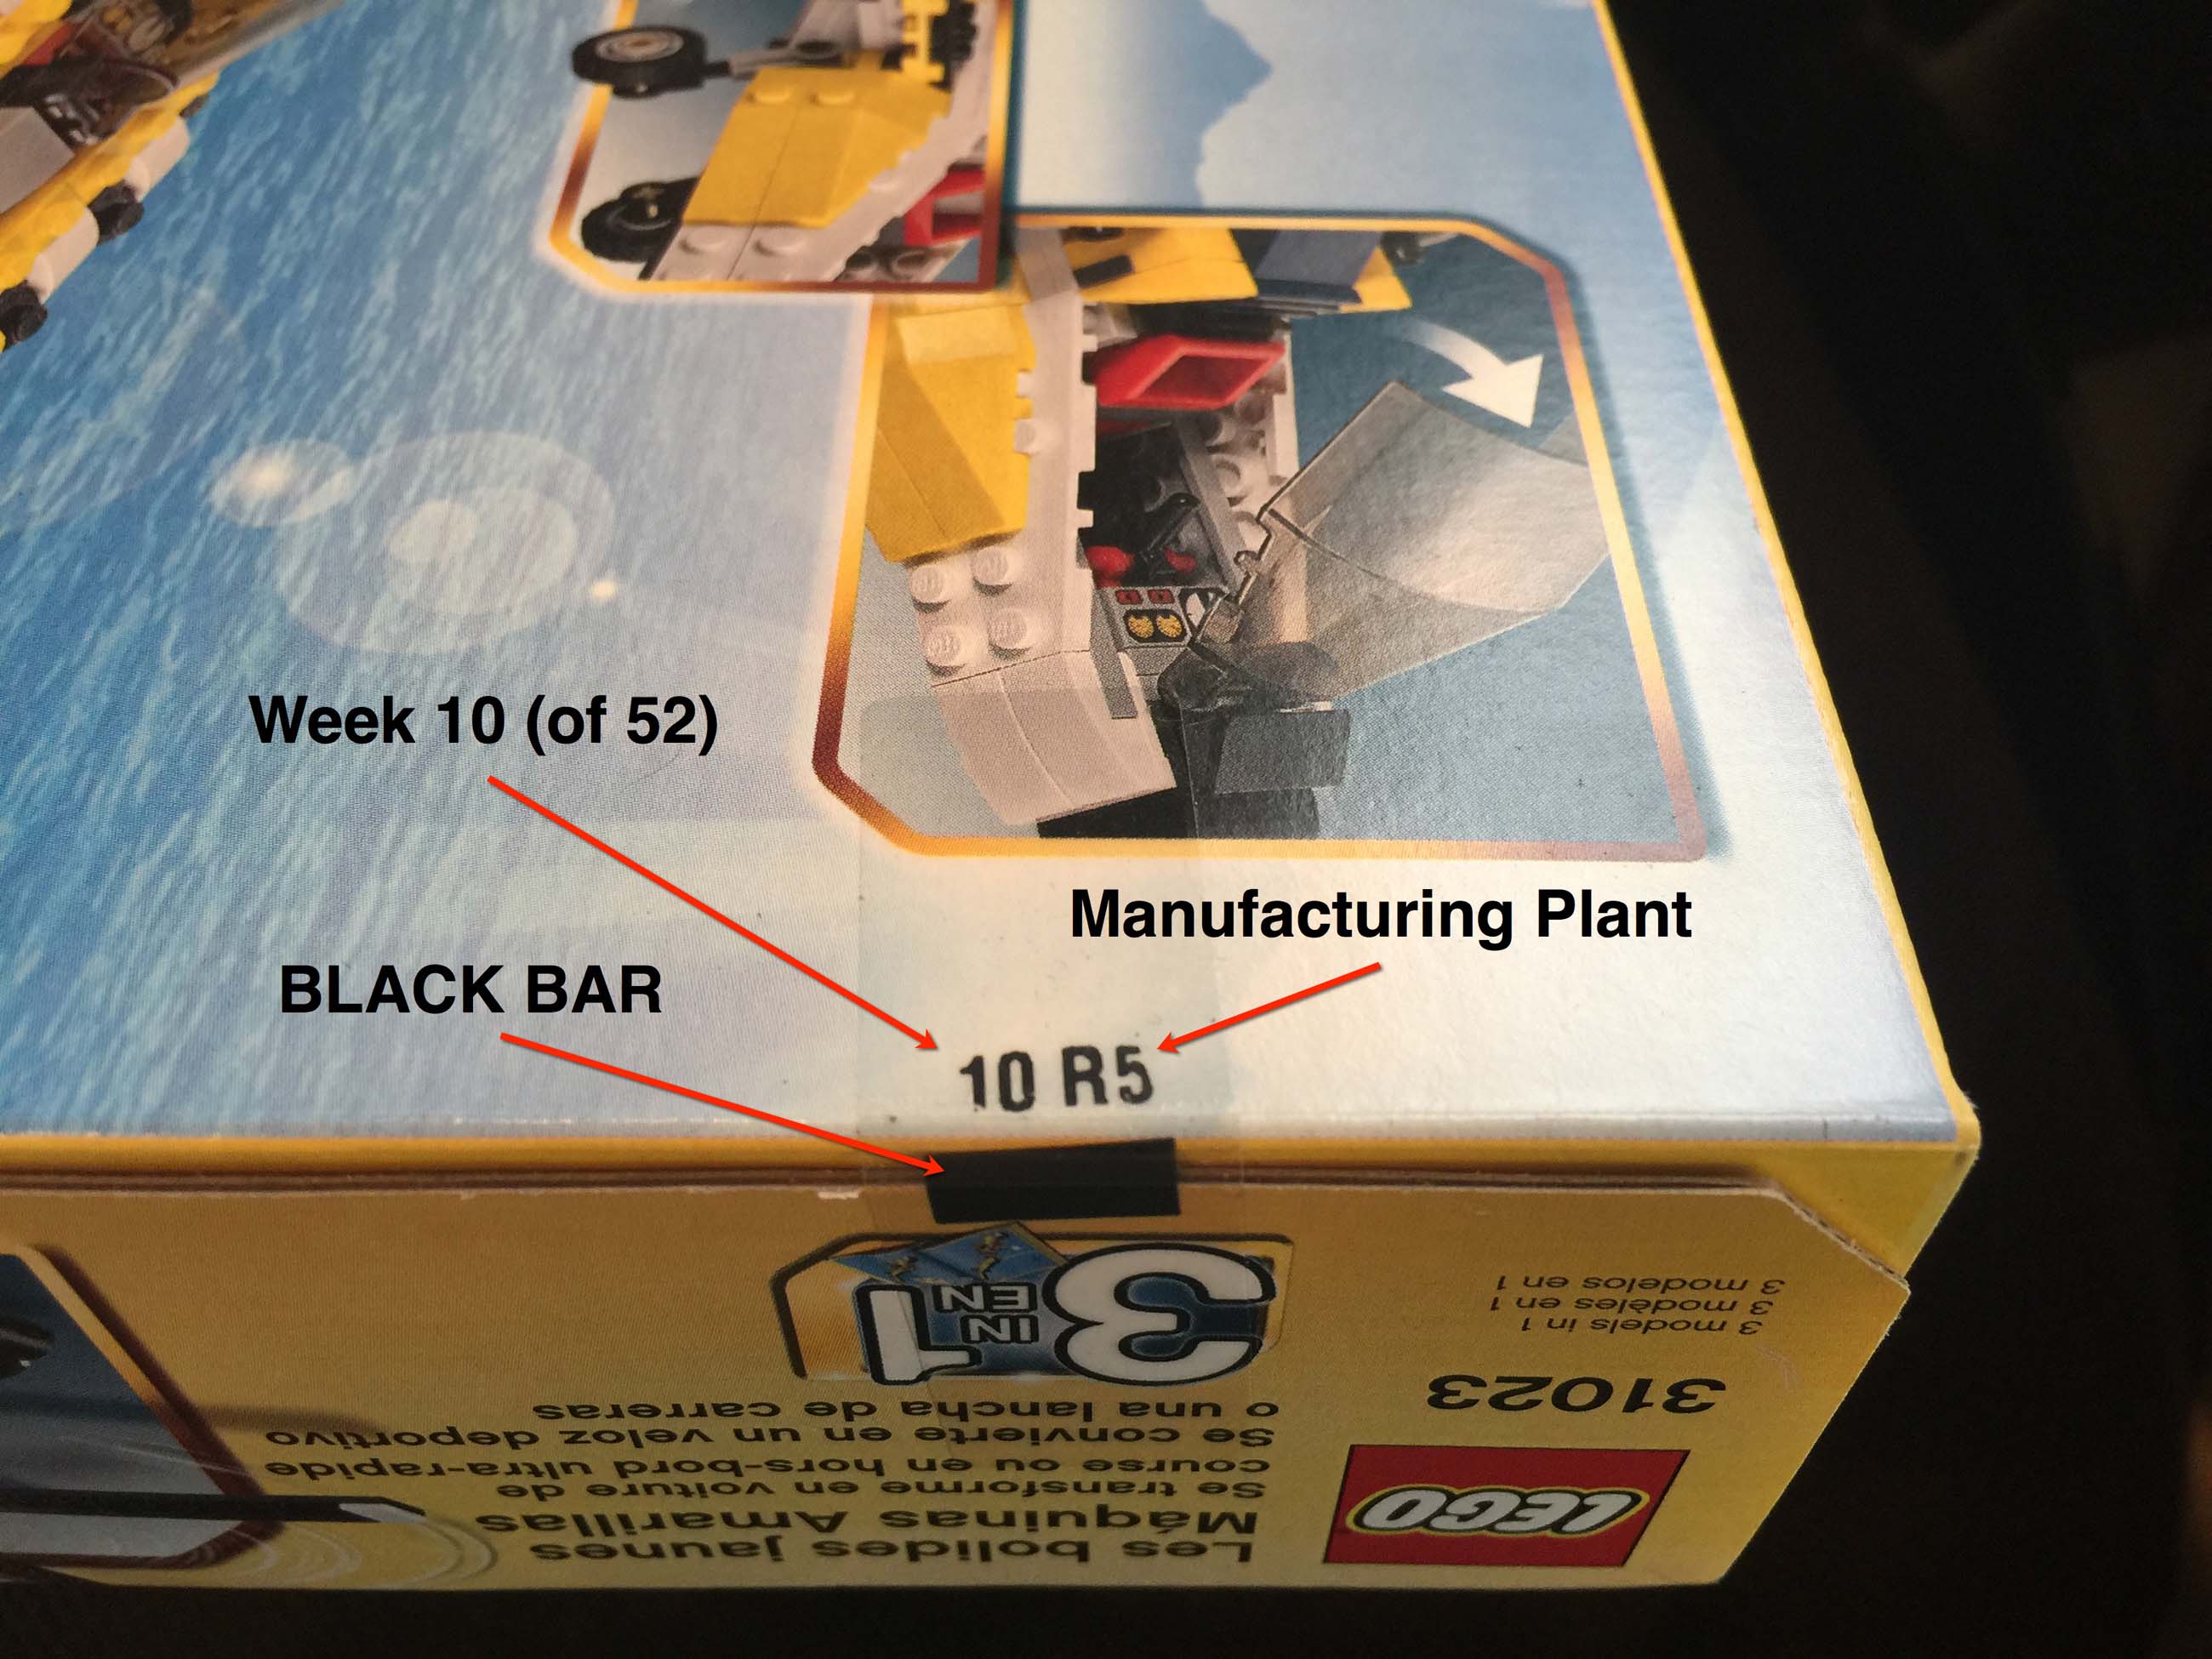 Fake 'Lepin' brand Lego arrived from China